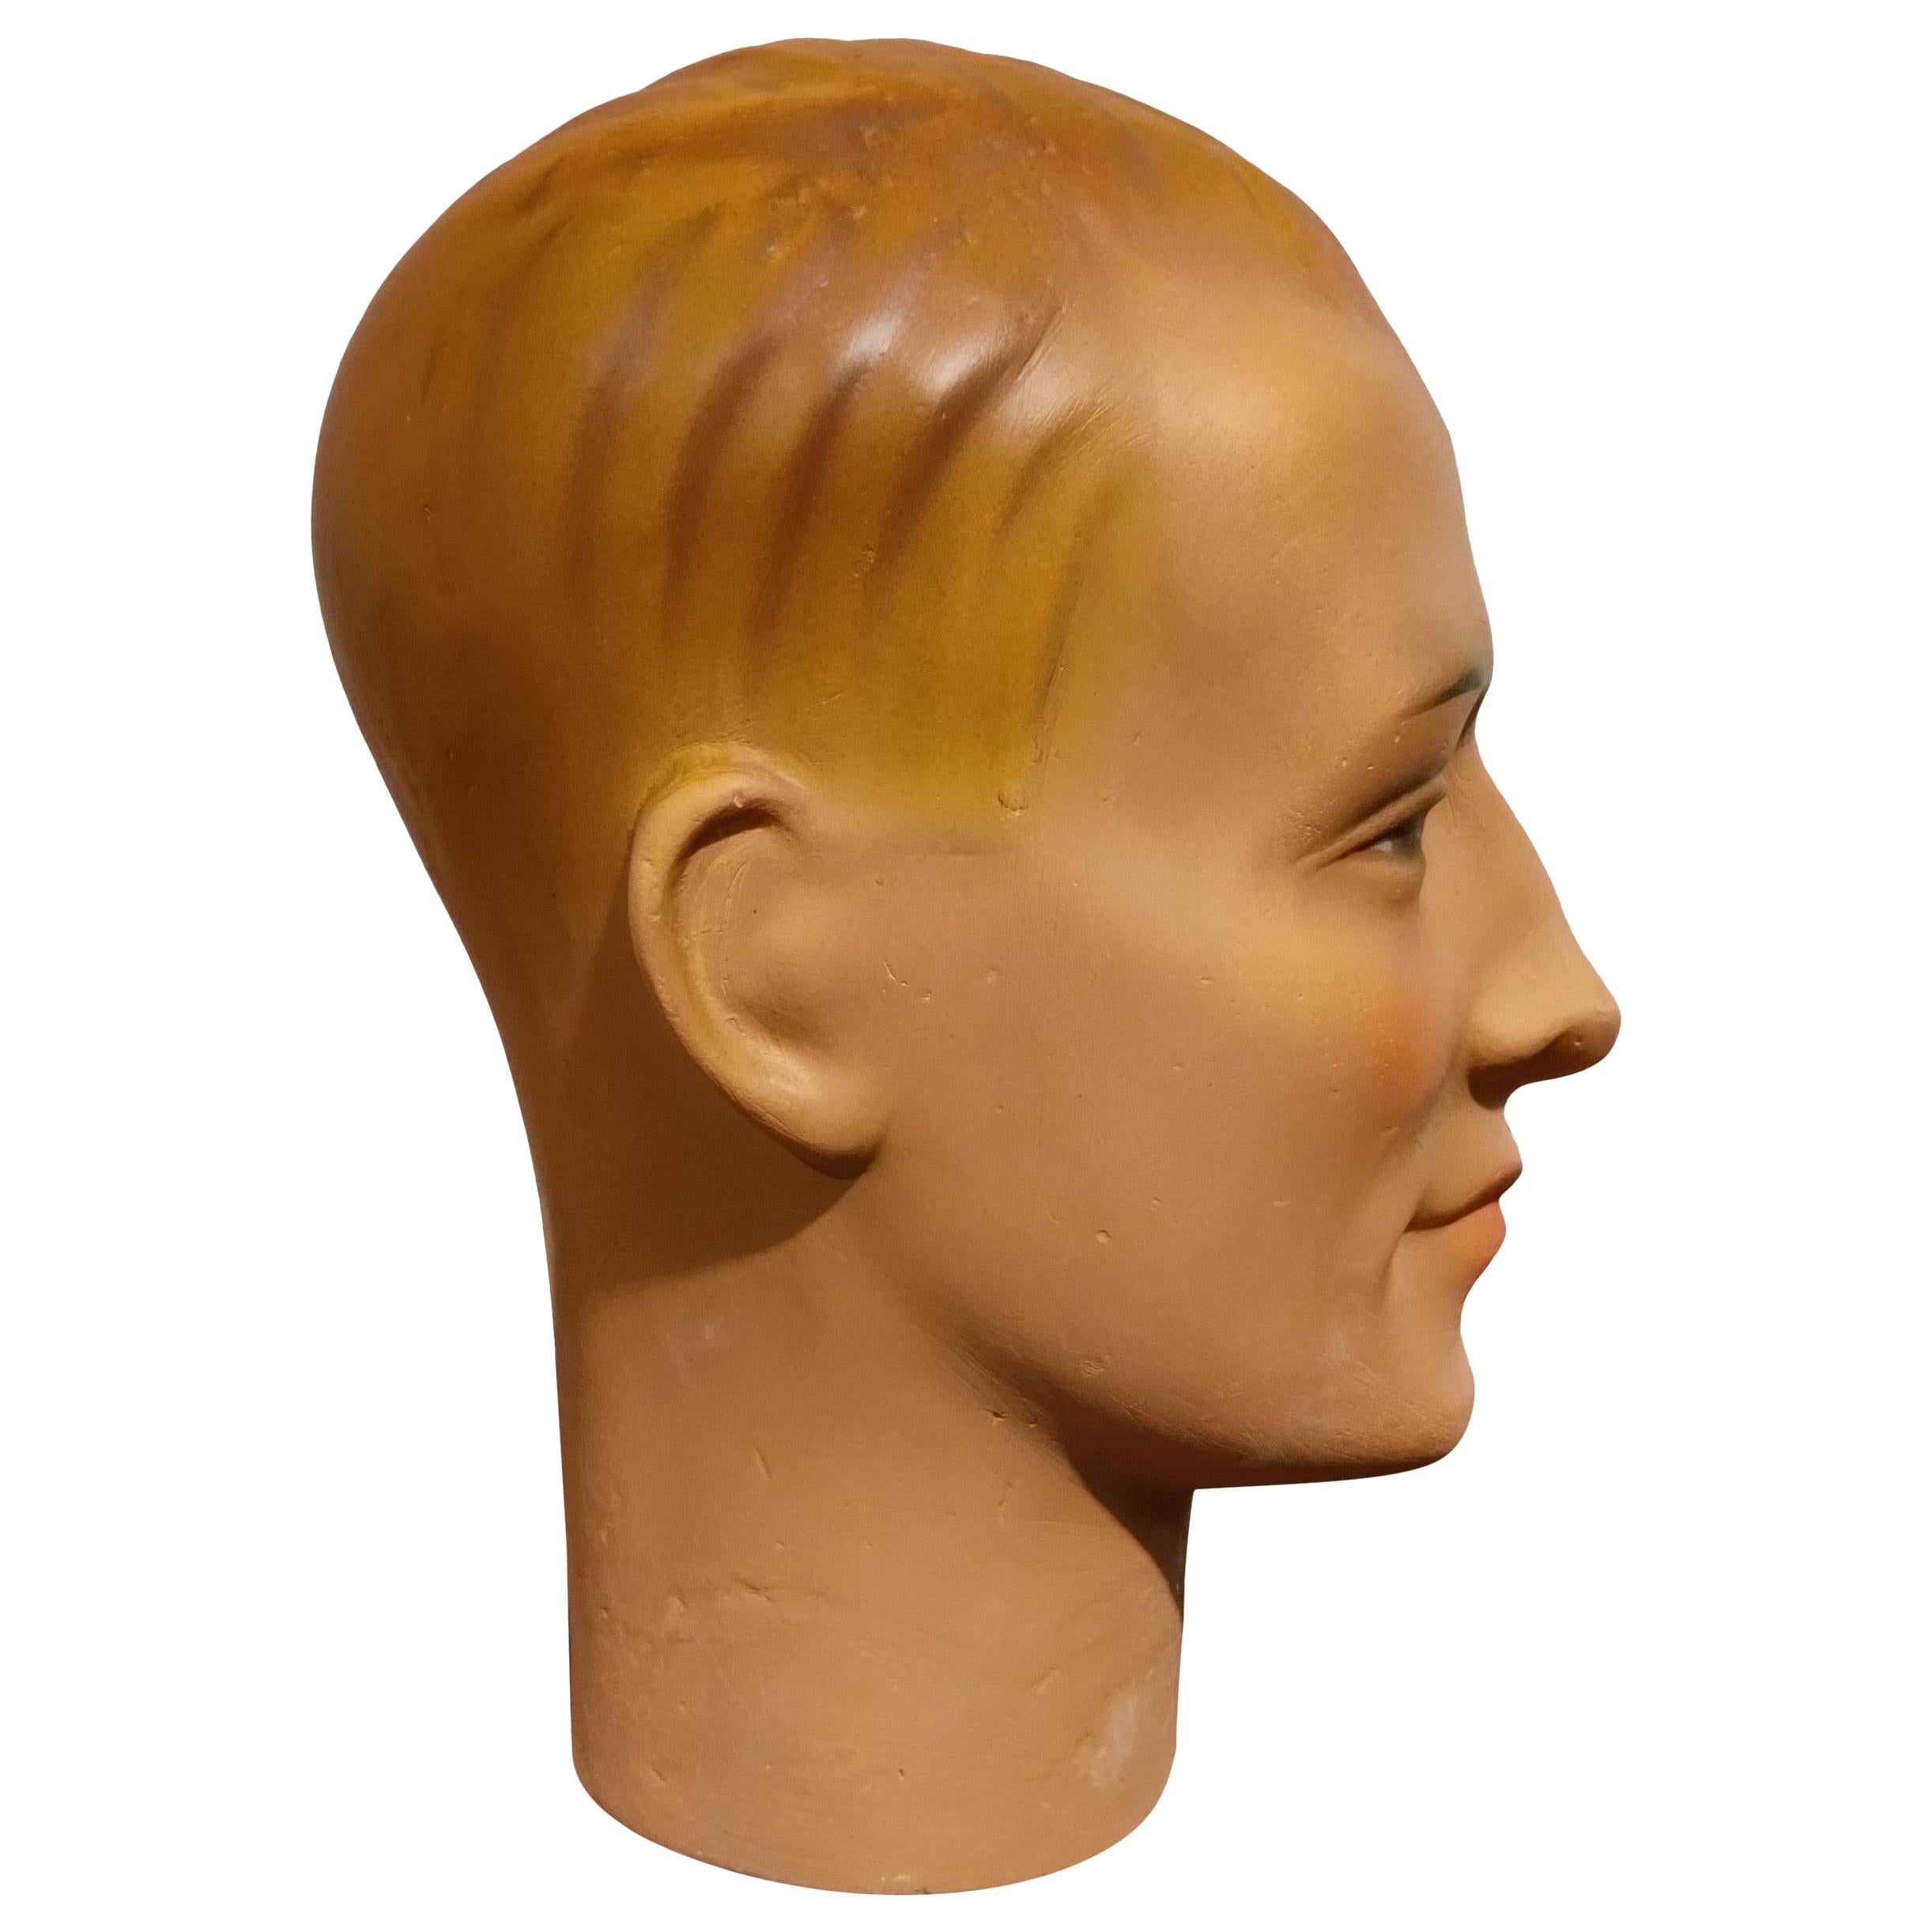 Beautiful male mannequin head made from plaster.

It has some minor user traces.

Comes from a lot acquired from a clothes shop that stopped activities.

Great decorative item to display glasses, hats,

France, 1960s

Measures: Height